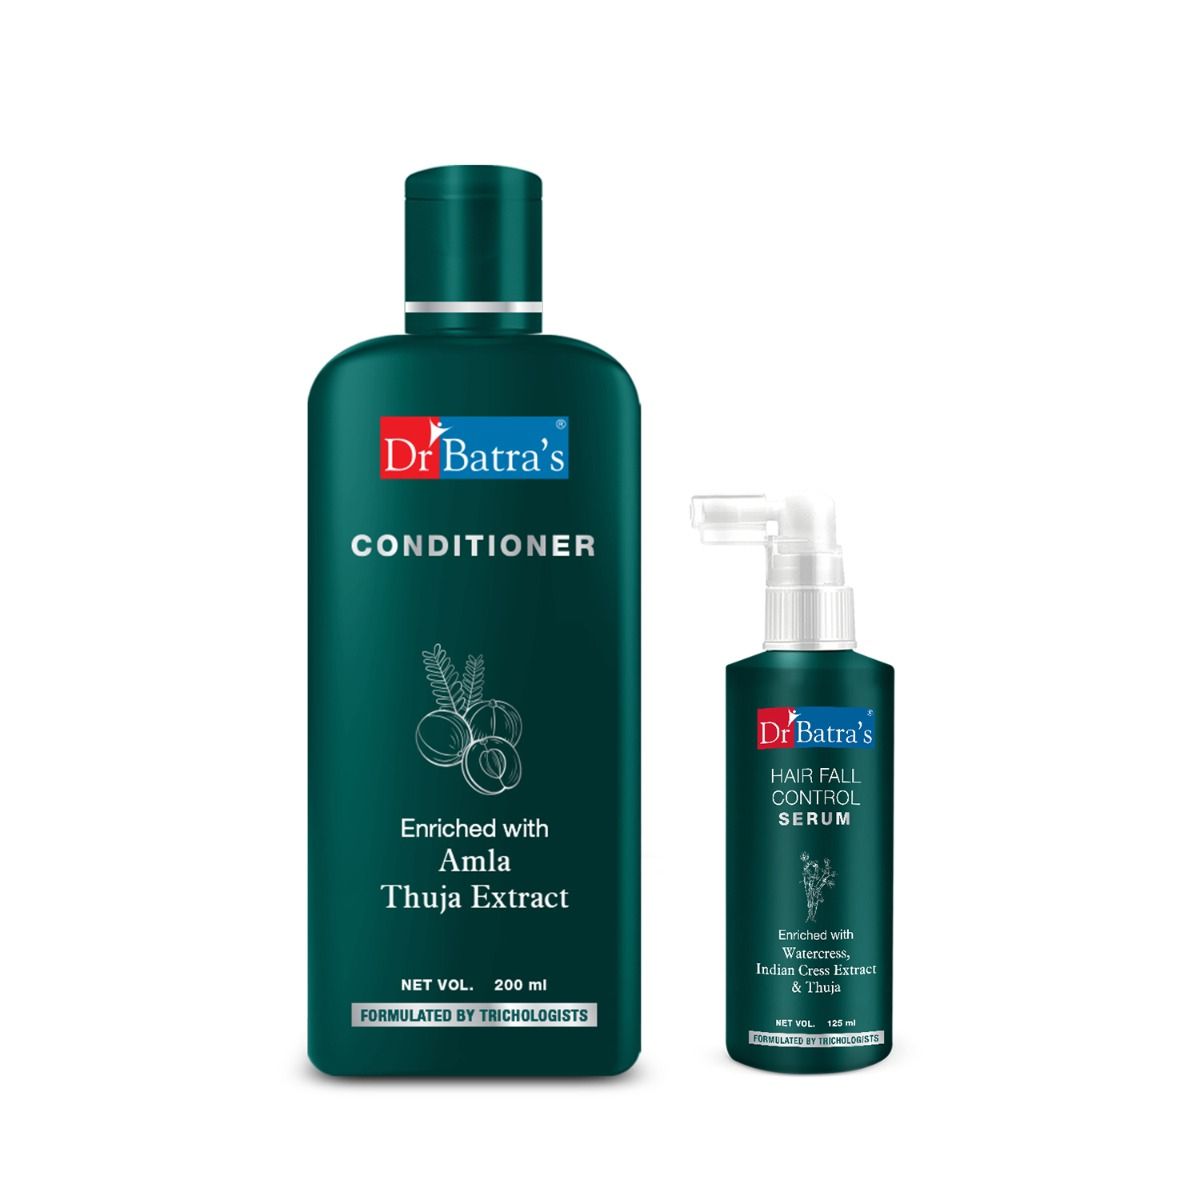     			Dr Batra's Hair Fall Control Serum-125 ml and Conditioner - 200 ml (Pack of 2)